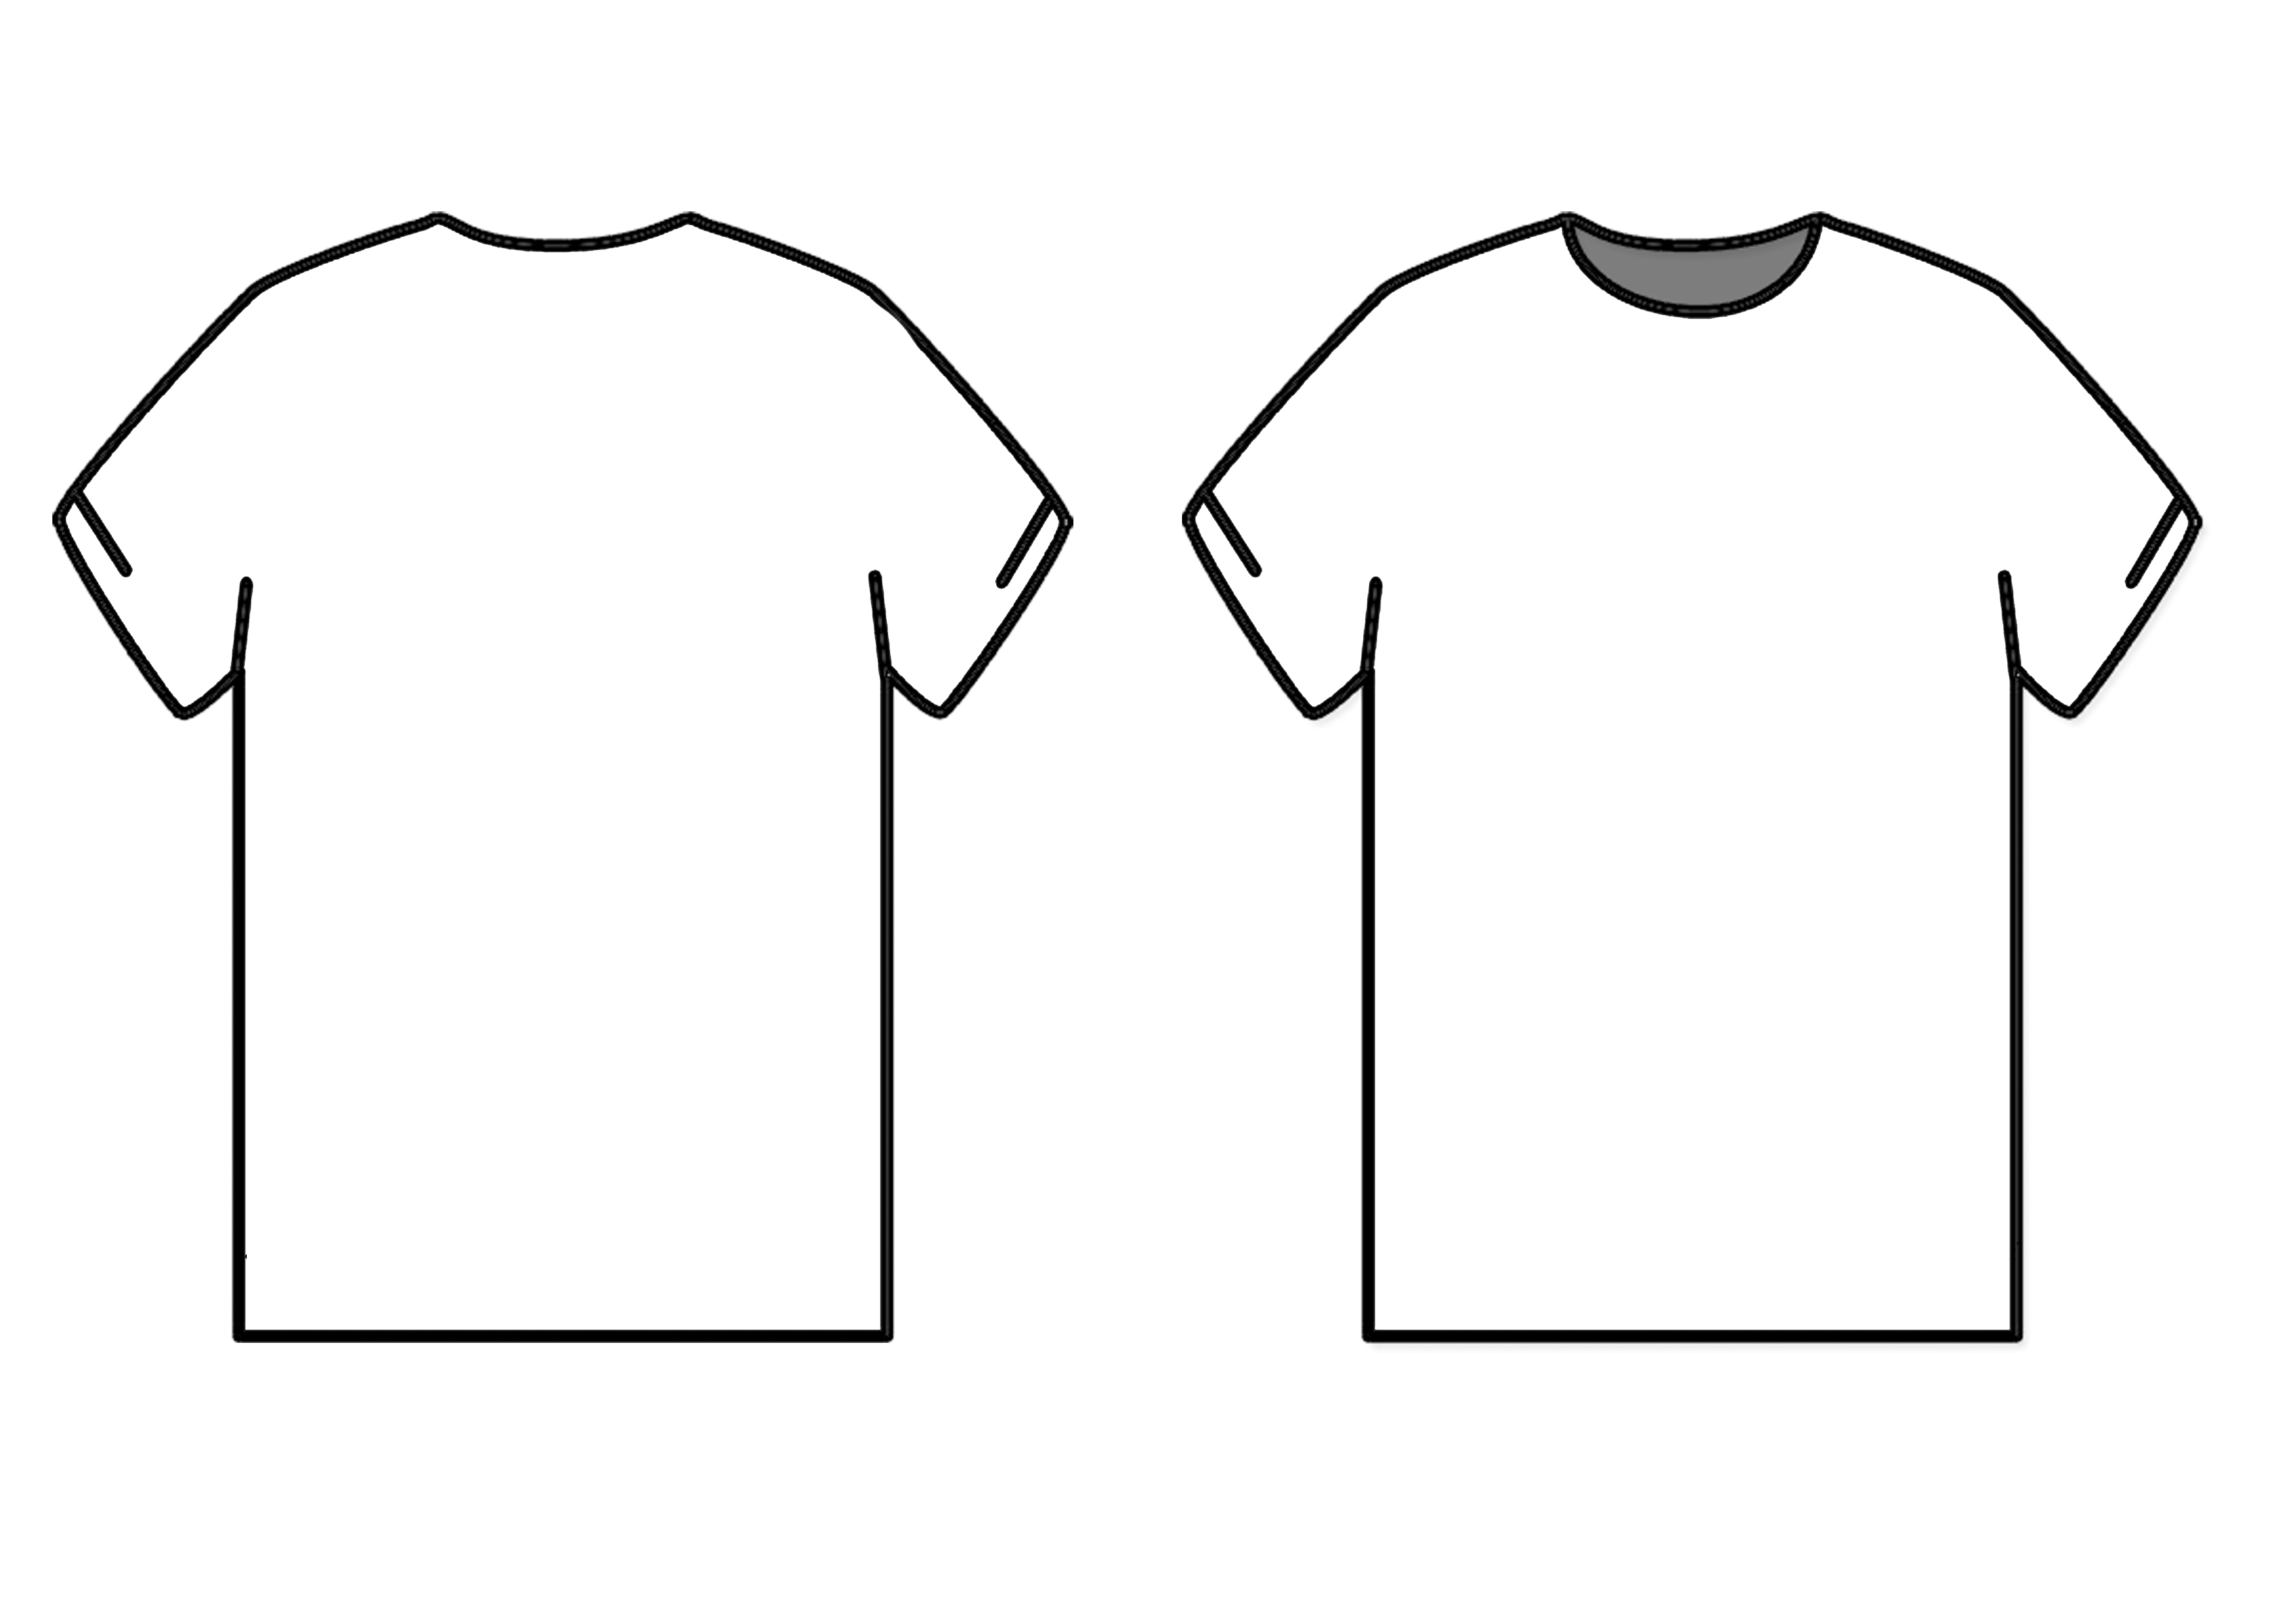 21 Tee Shirt Template For Photoshop Images - Shirt Design Template Inside Blank T Shirt Design Template Psd